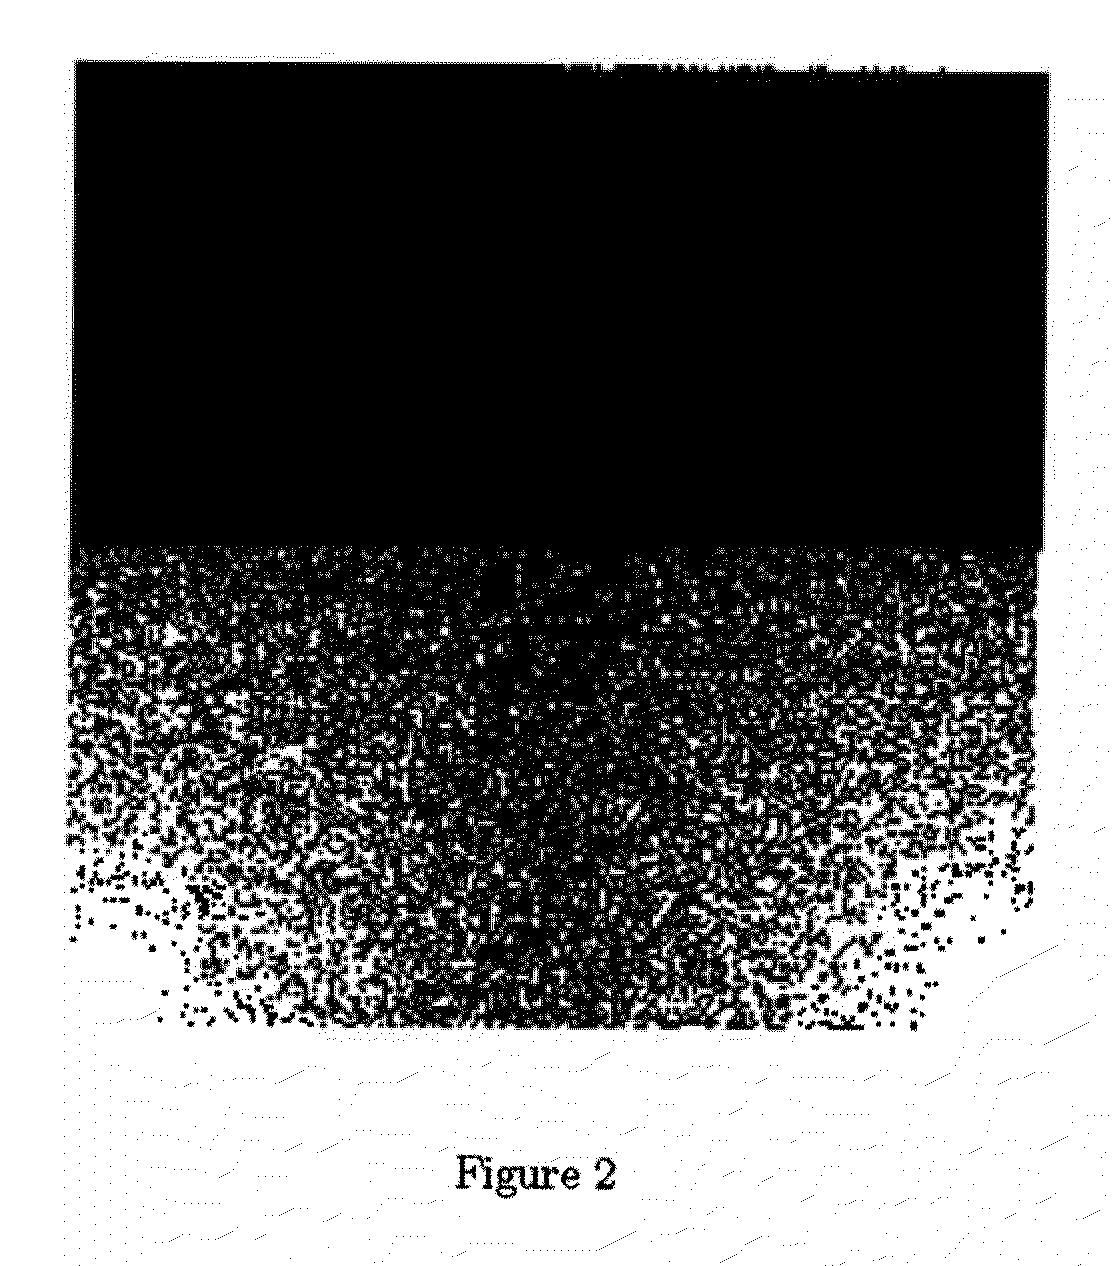 System and Method for Fixed Point Continuation for Total Variation Based Compressed Sensing Imaging